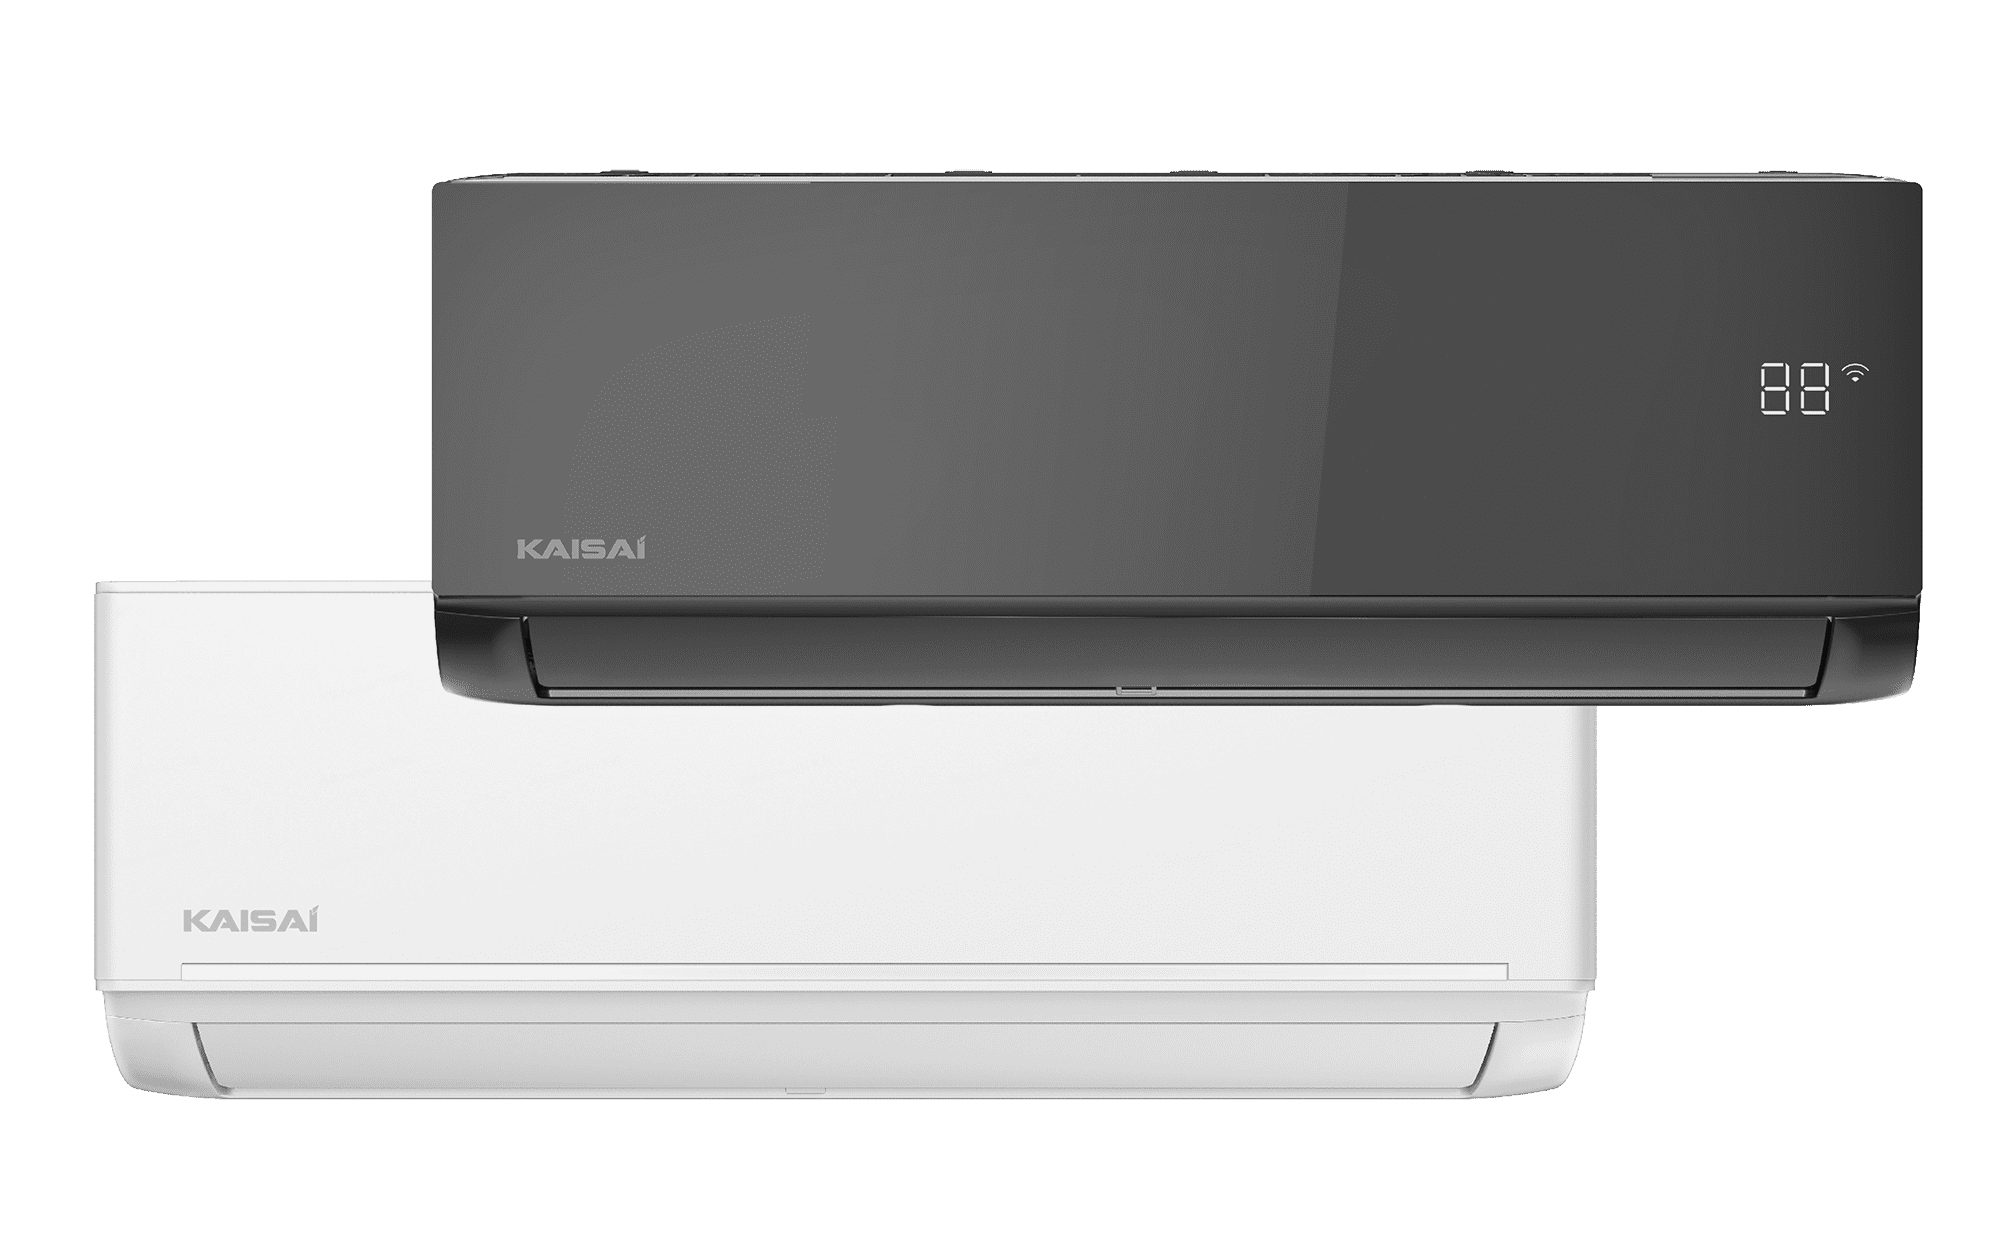 Ice series air conditioners/heat pumps